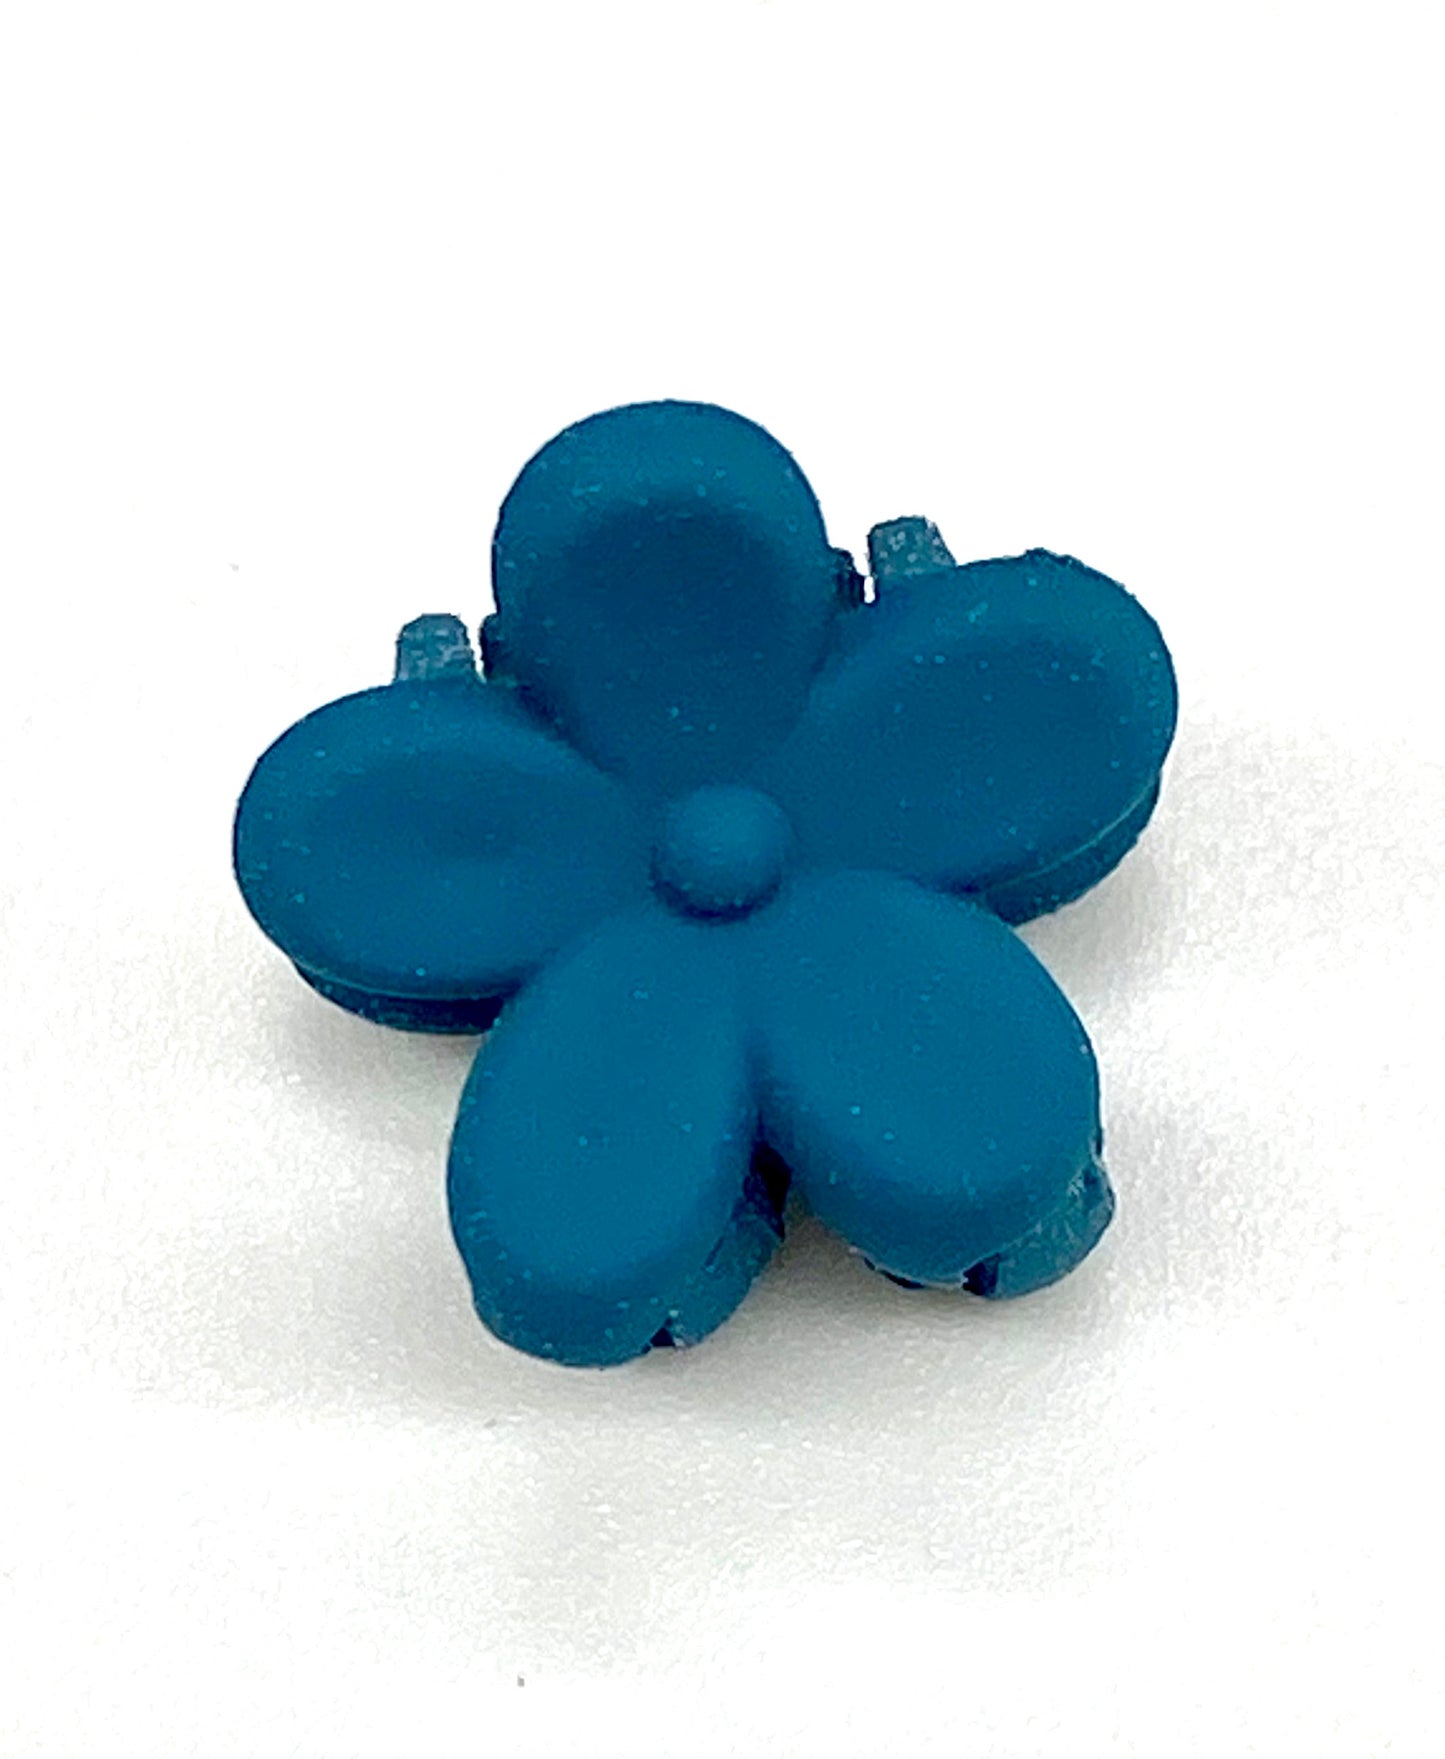 Flower Power Magic Clips!! Glow In The Dark! (doll sold separately)